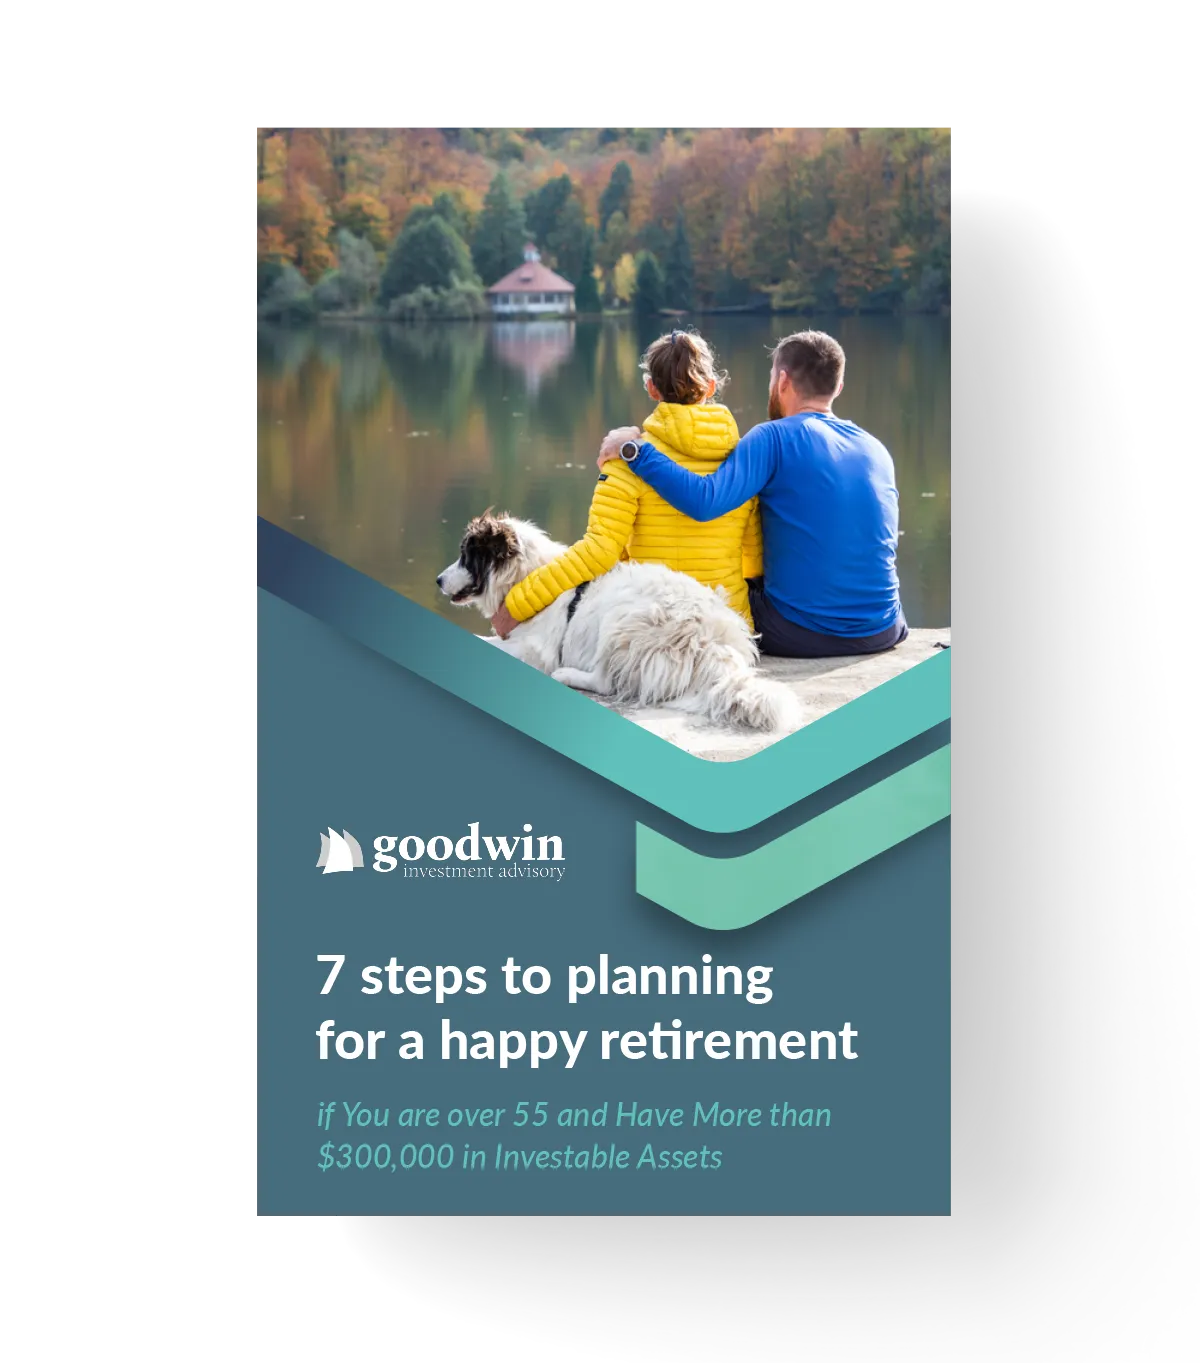 7 steps to planning for a happy retirement guide